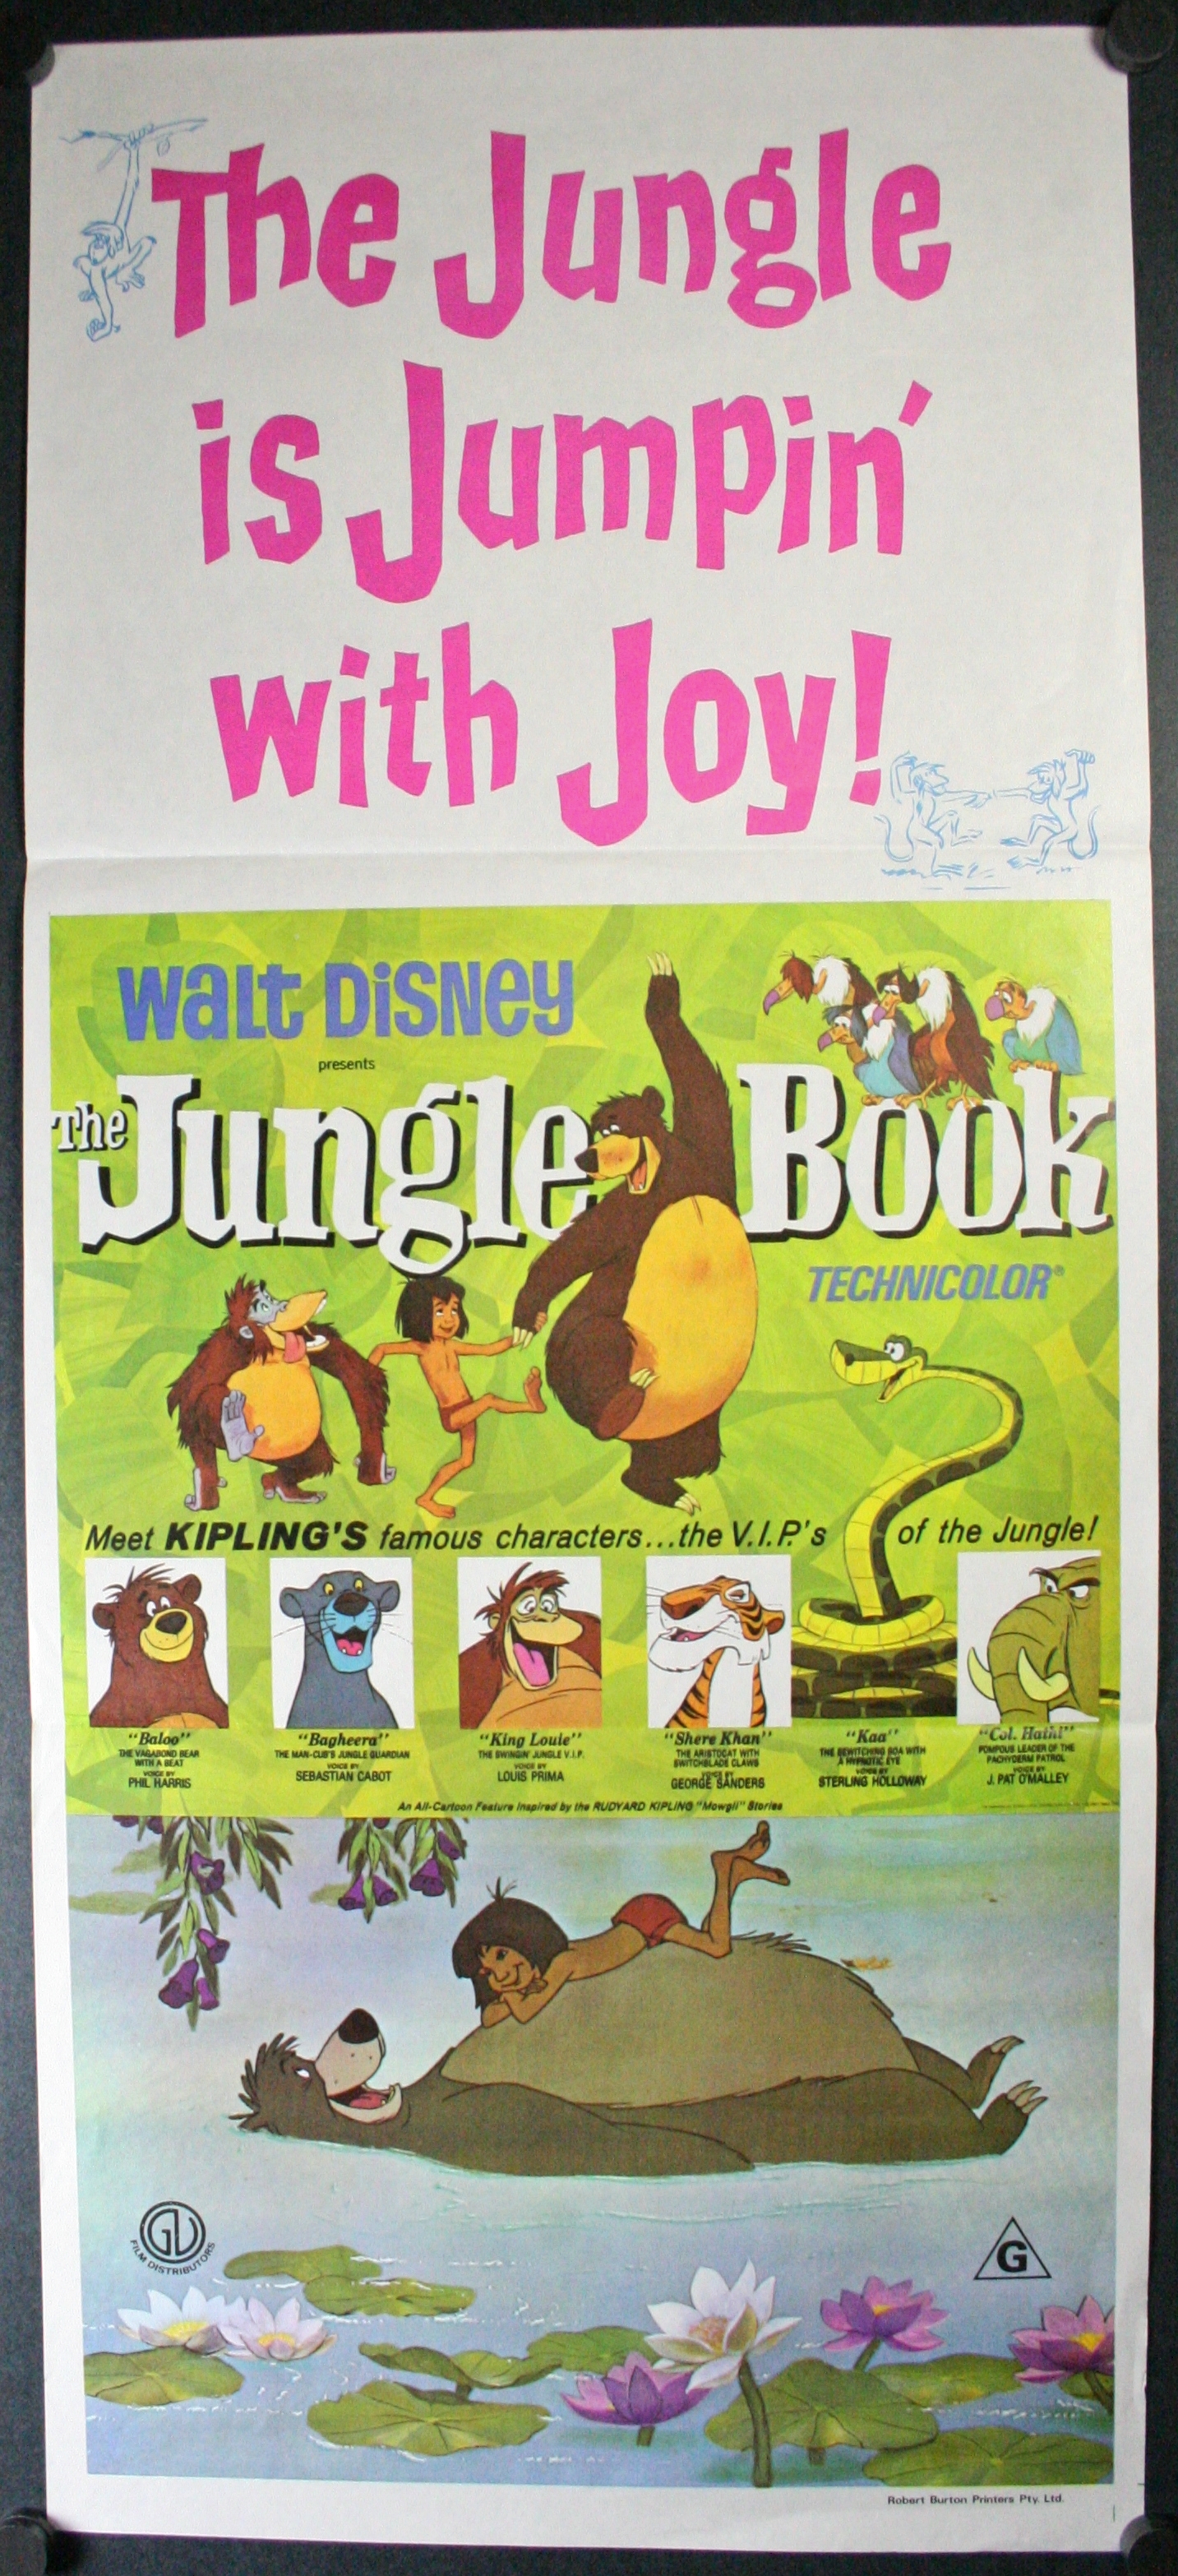 free for ios instal The Jungle Book